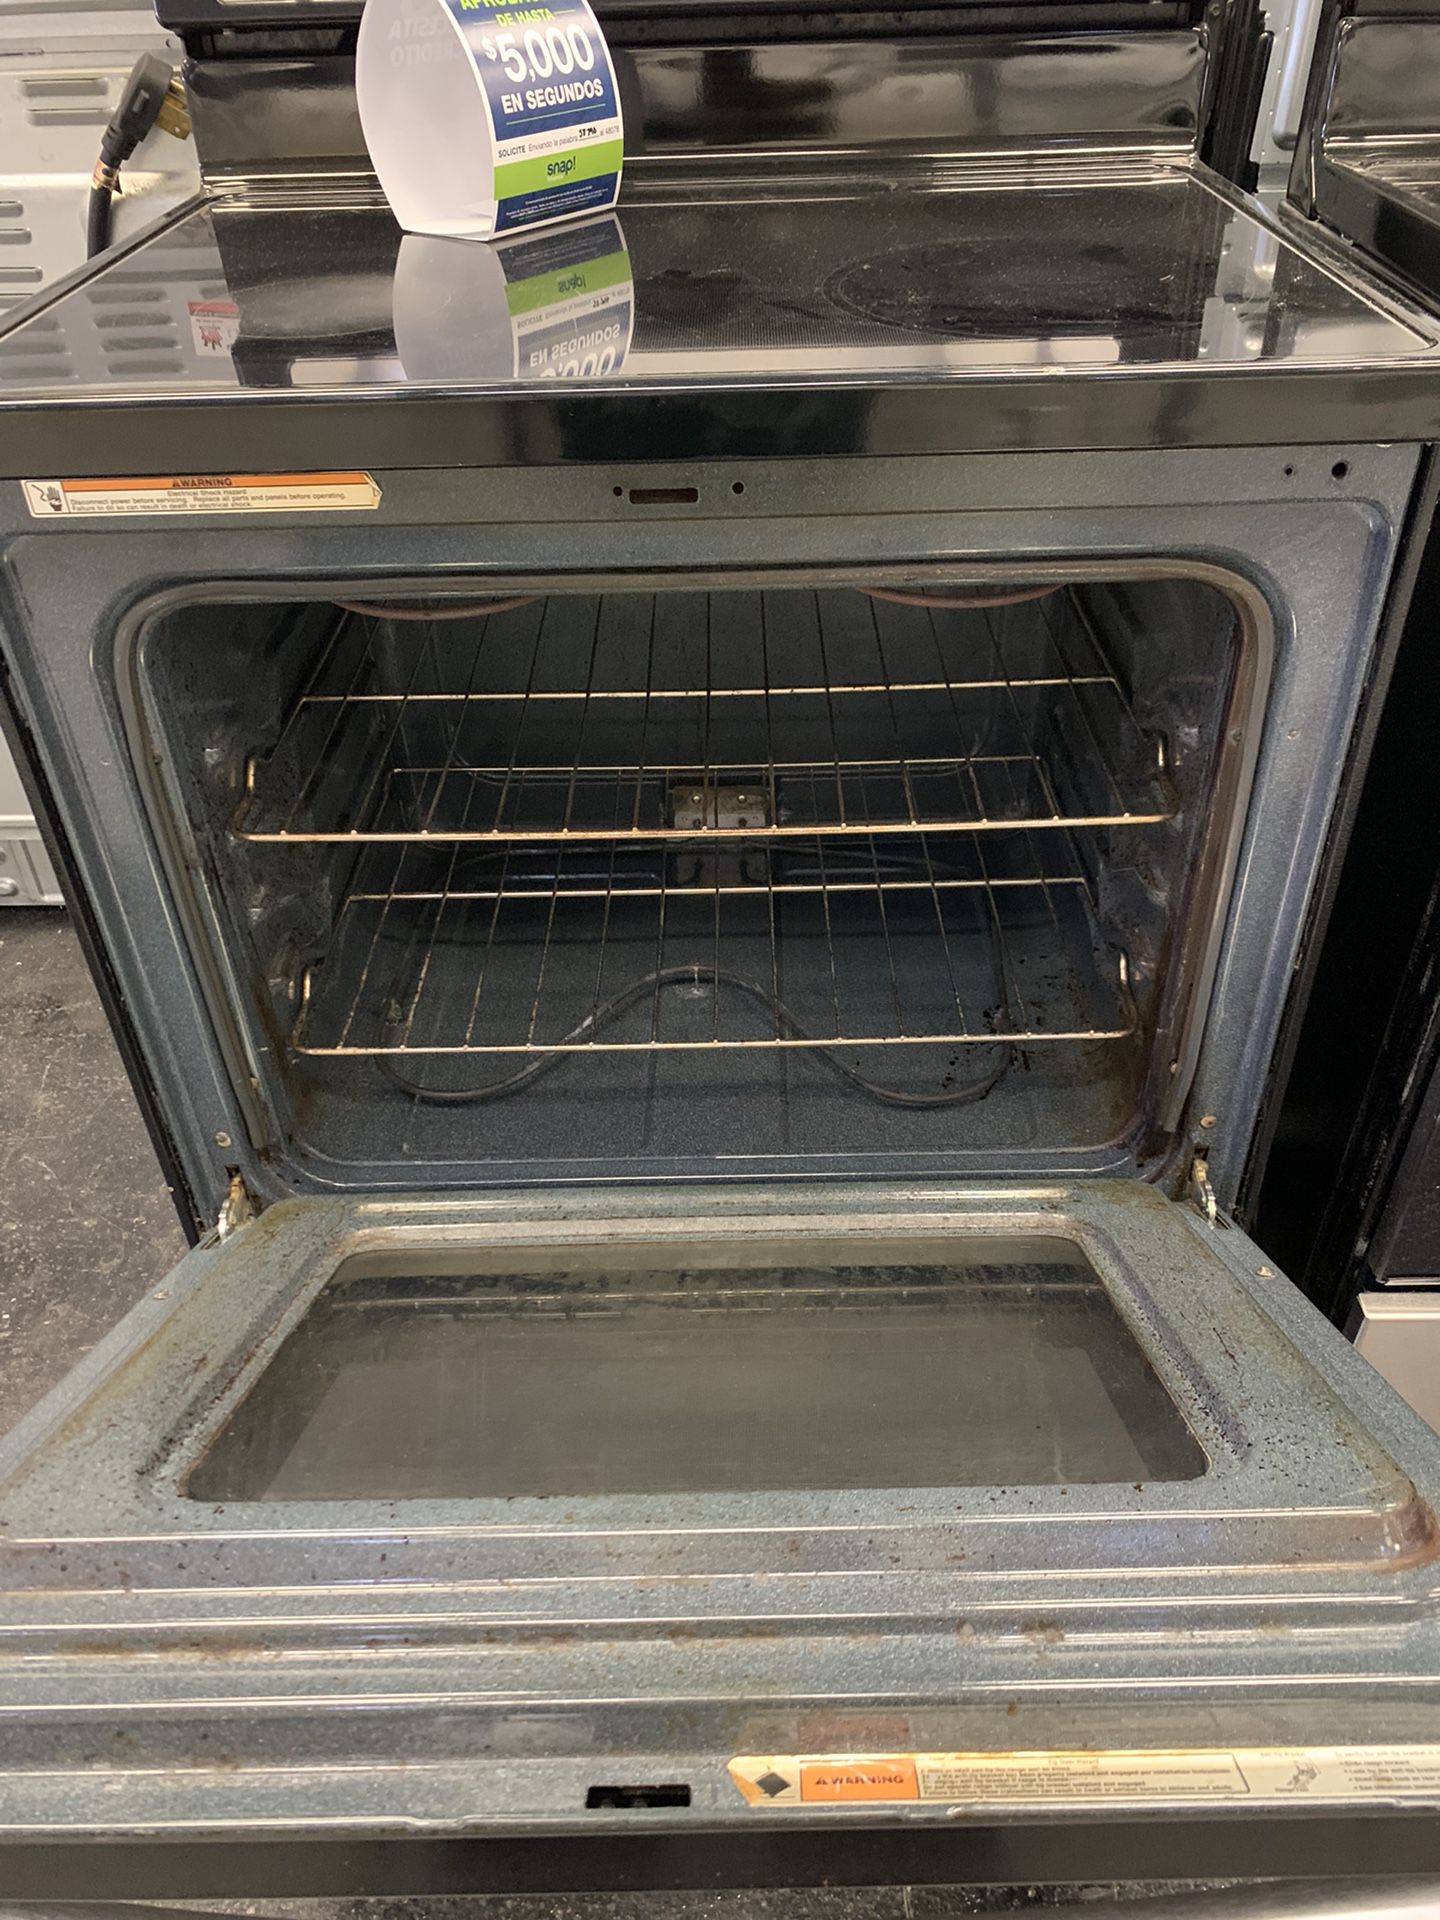 New 20 Electric Stove for Sale in Cumberland, IN - OfferUp